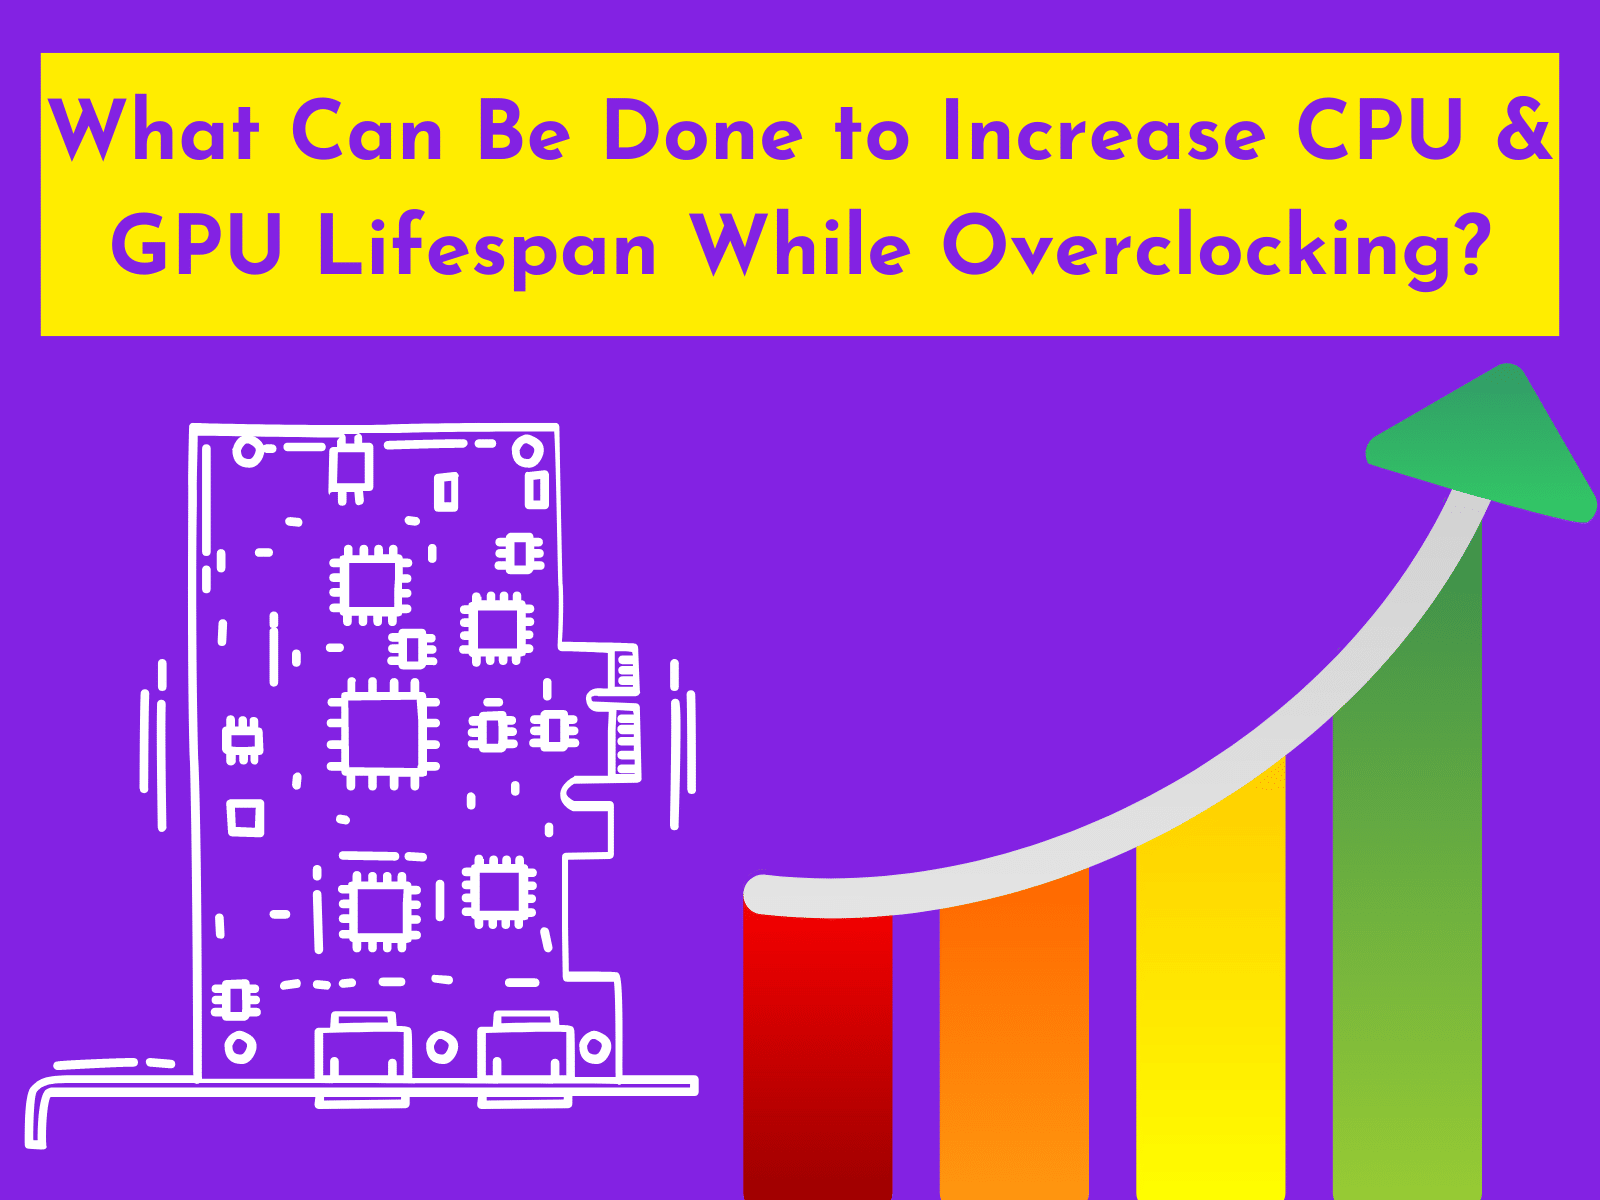 What Can Be Done to Increase CPU & GPU Lifespan While Overclocking.png